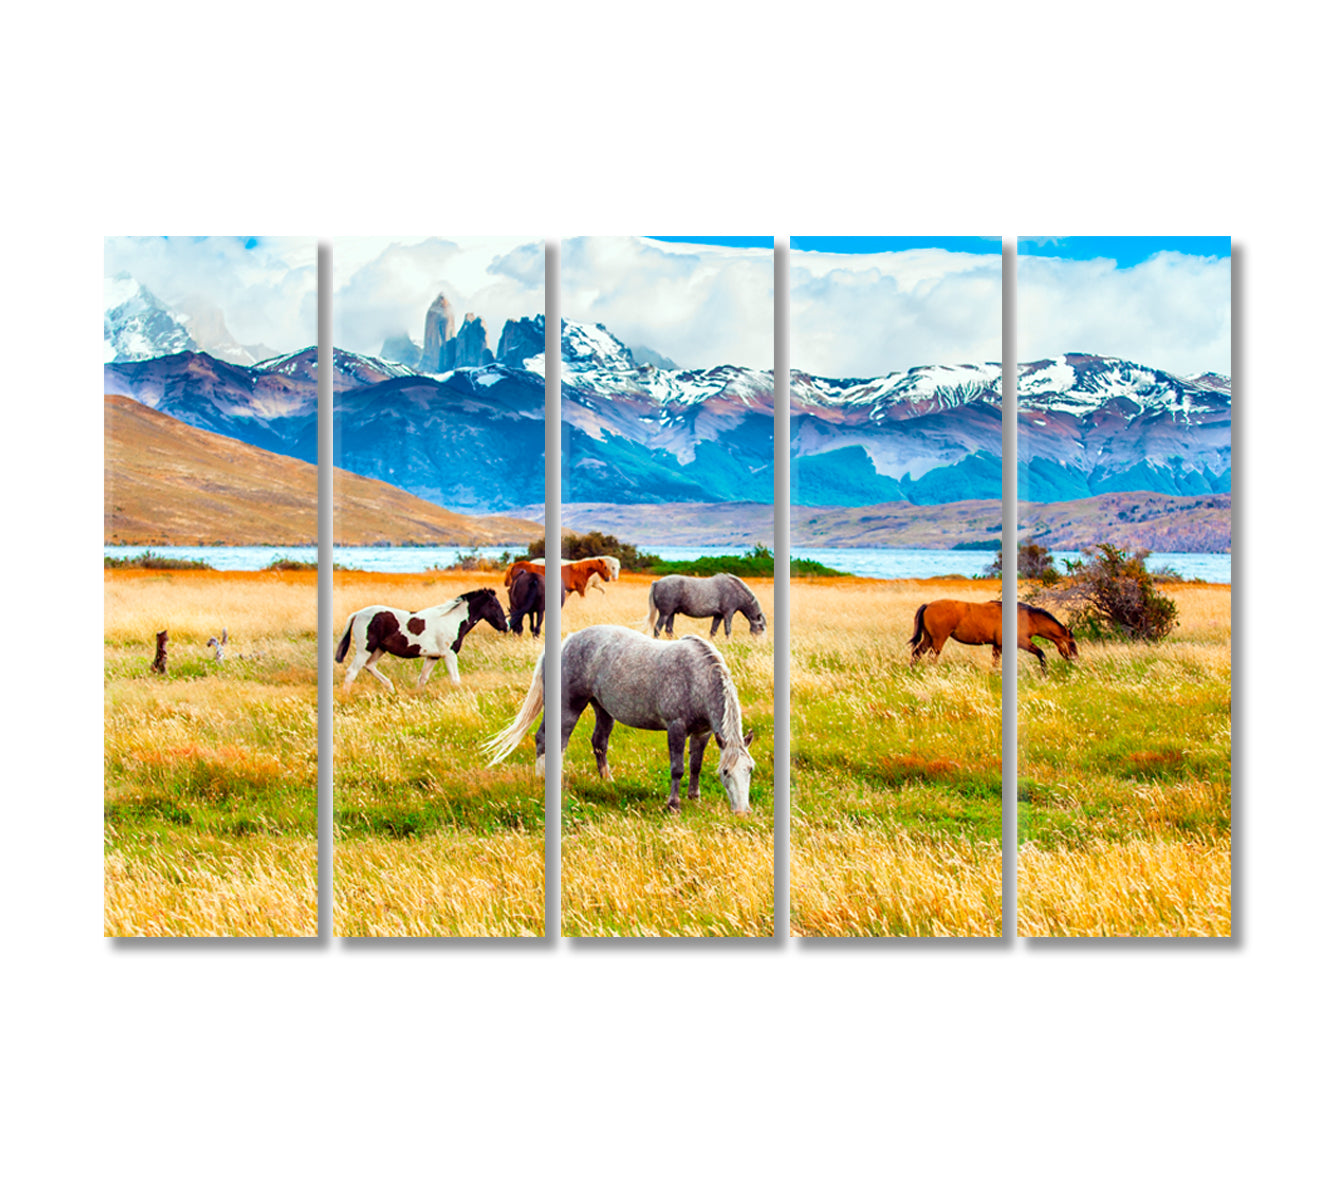 Herd of Wild Horses in Torres del Paine Park in Chile Canvas Print-Canvas Print-CetArt-5 Panels-36x24 inches-CetArt